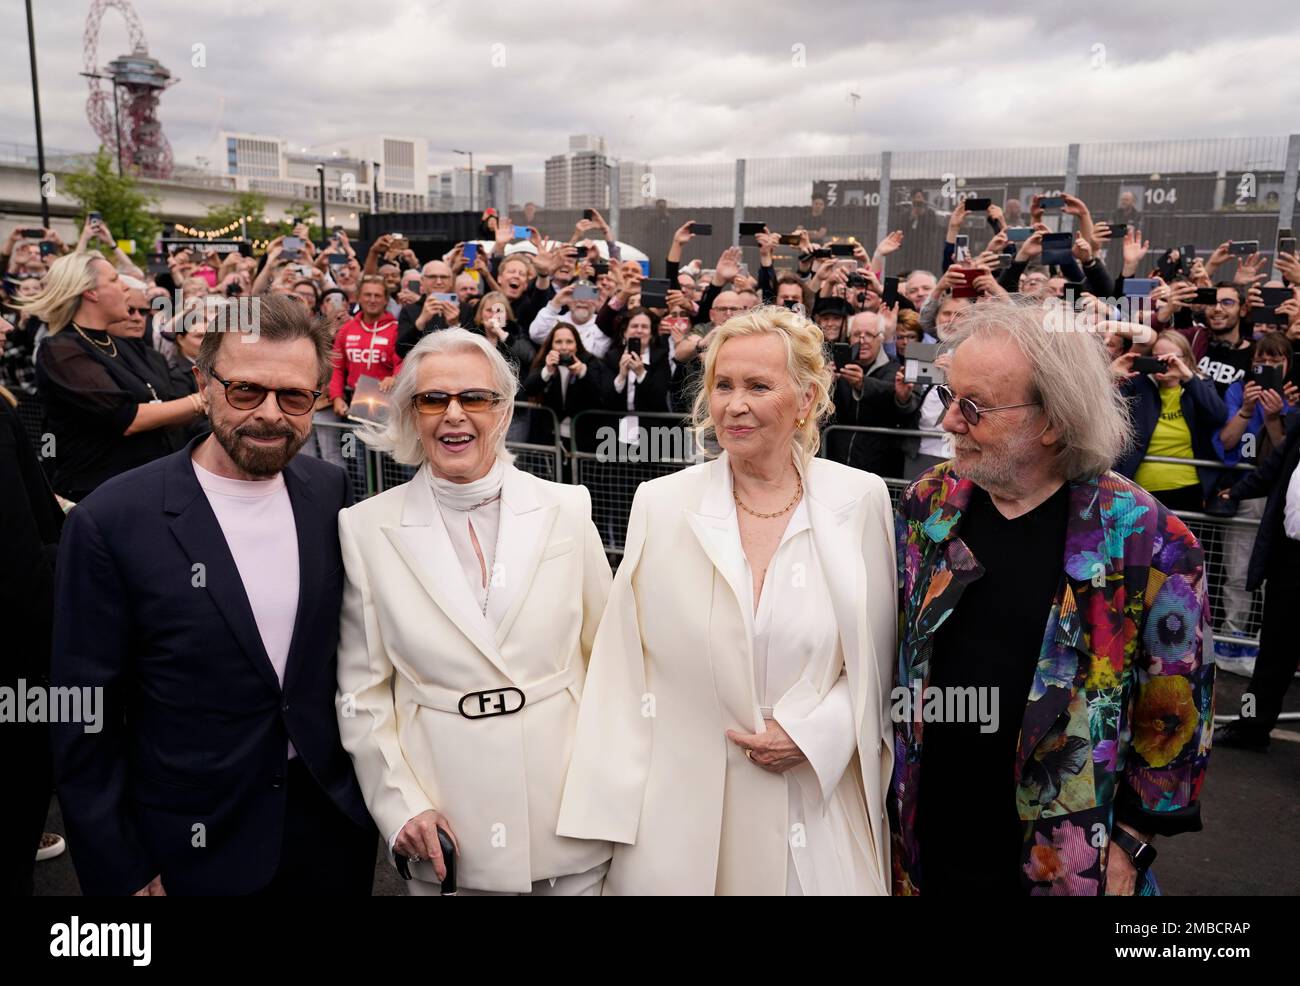 Members of ABBA, from left, Bjorn Ulvaeus, Anni-Frid Lyngstad, Agnetha  Faltskog and Benny Andersson arrive for the ABBA Voyage concert at the ABBA  Arena in London, Thursday May 26, 2022. ABBA is